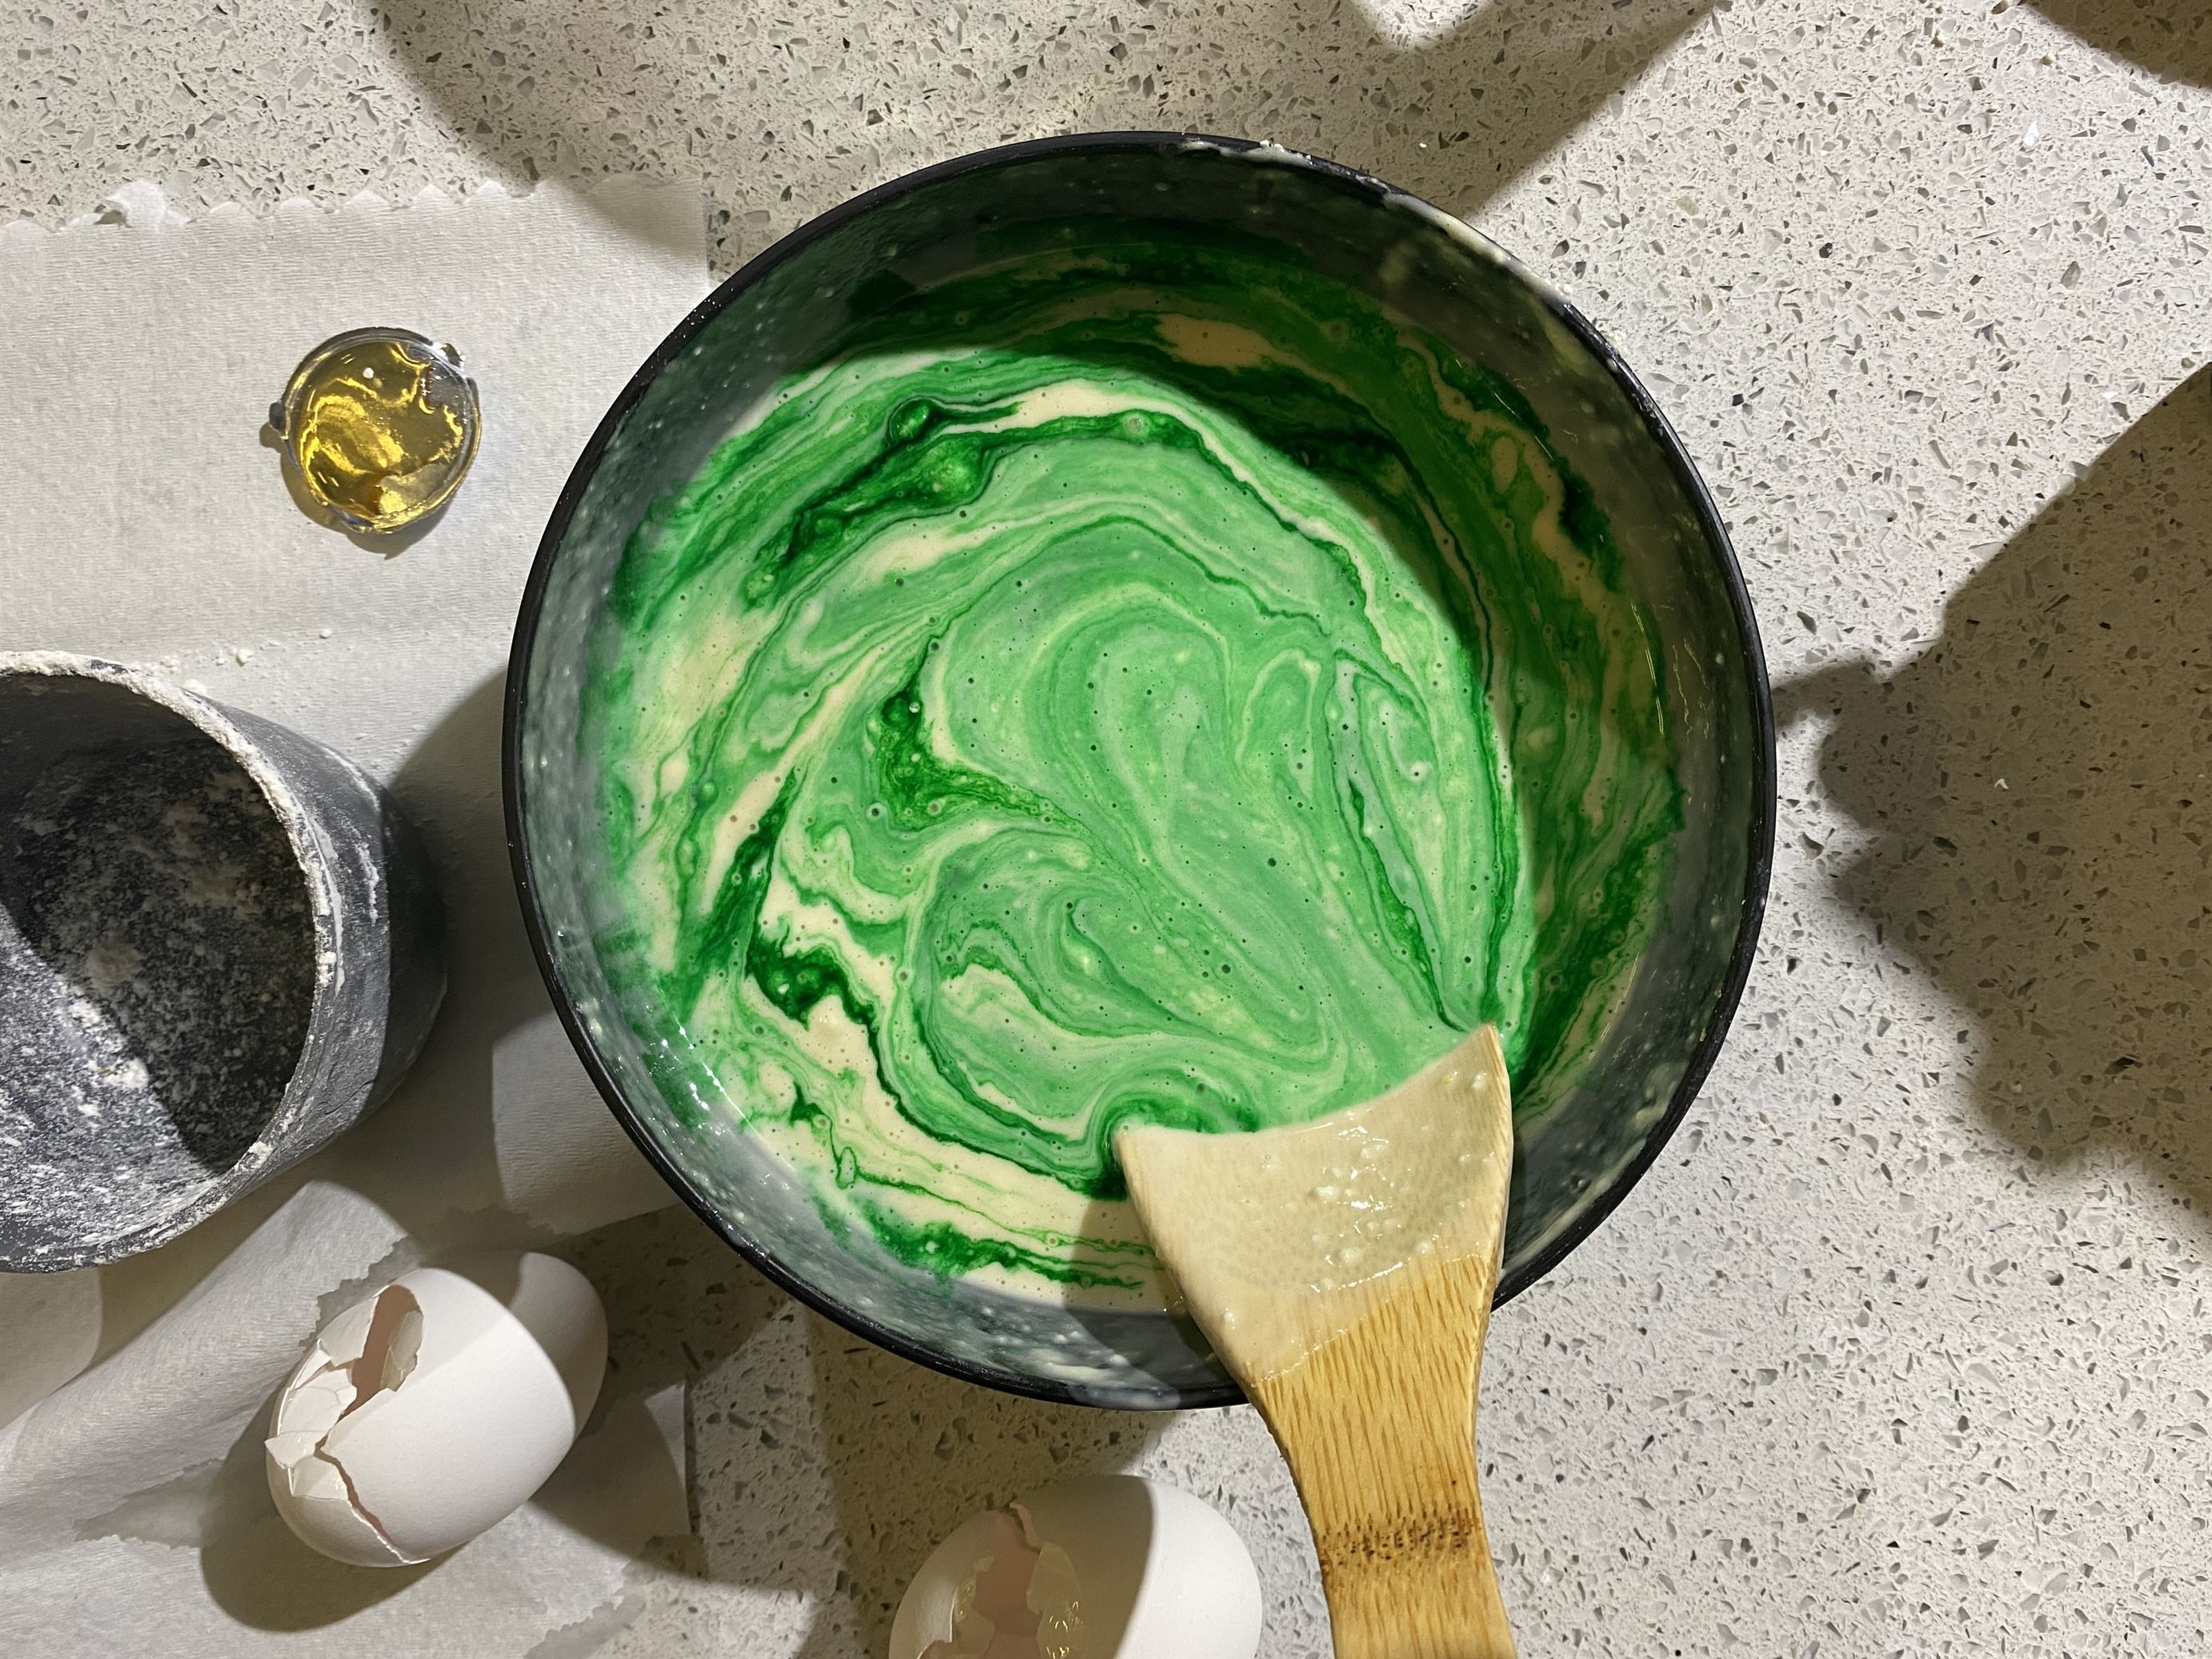 Add green food dye to your pancake batter to give a festive St. Patty's day vibe.
Sal DiMaggio | The Montclarion